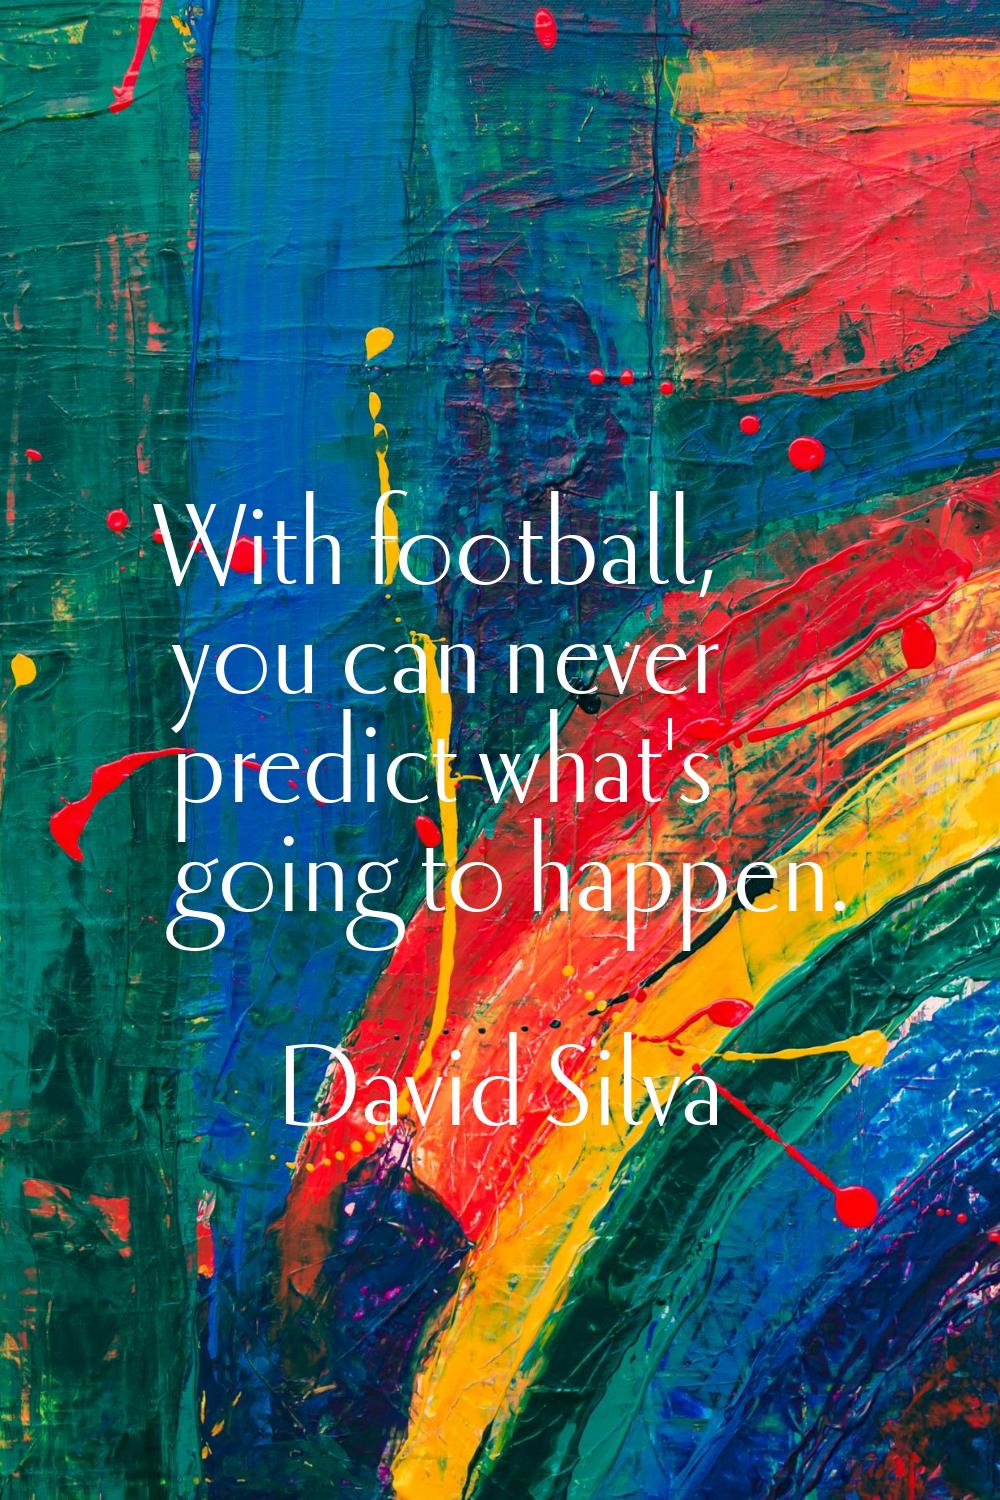 With football, you can never predict what's going to happen.